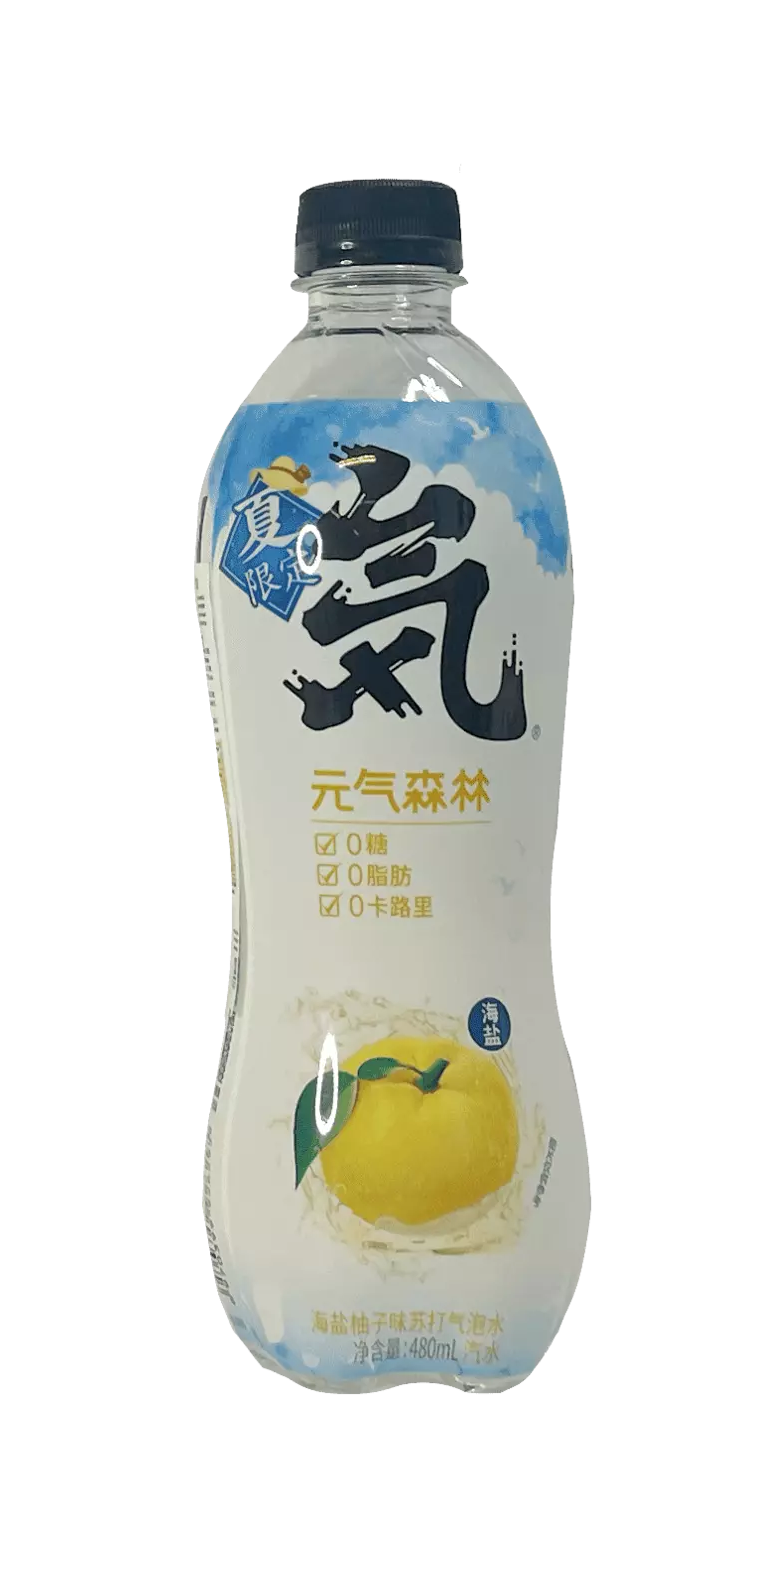 Carbonated Water With Pomelo/Sea Salt Flavor 480ml/Bottle Yuan Qi Sen Lin China